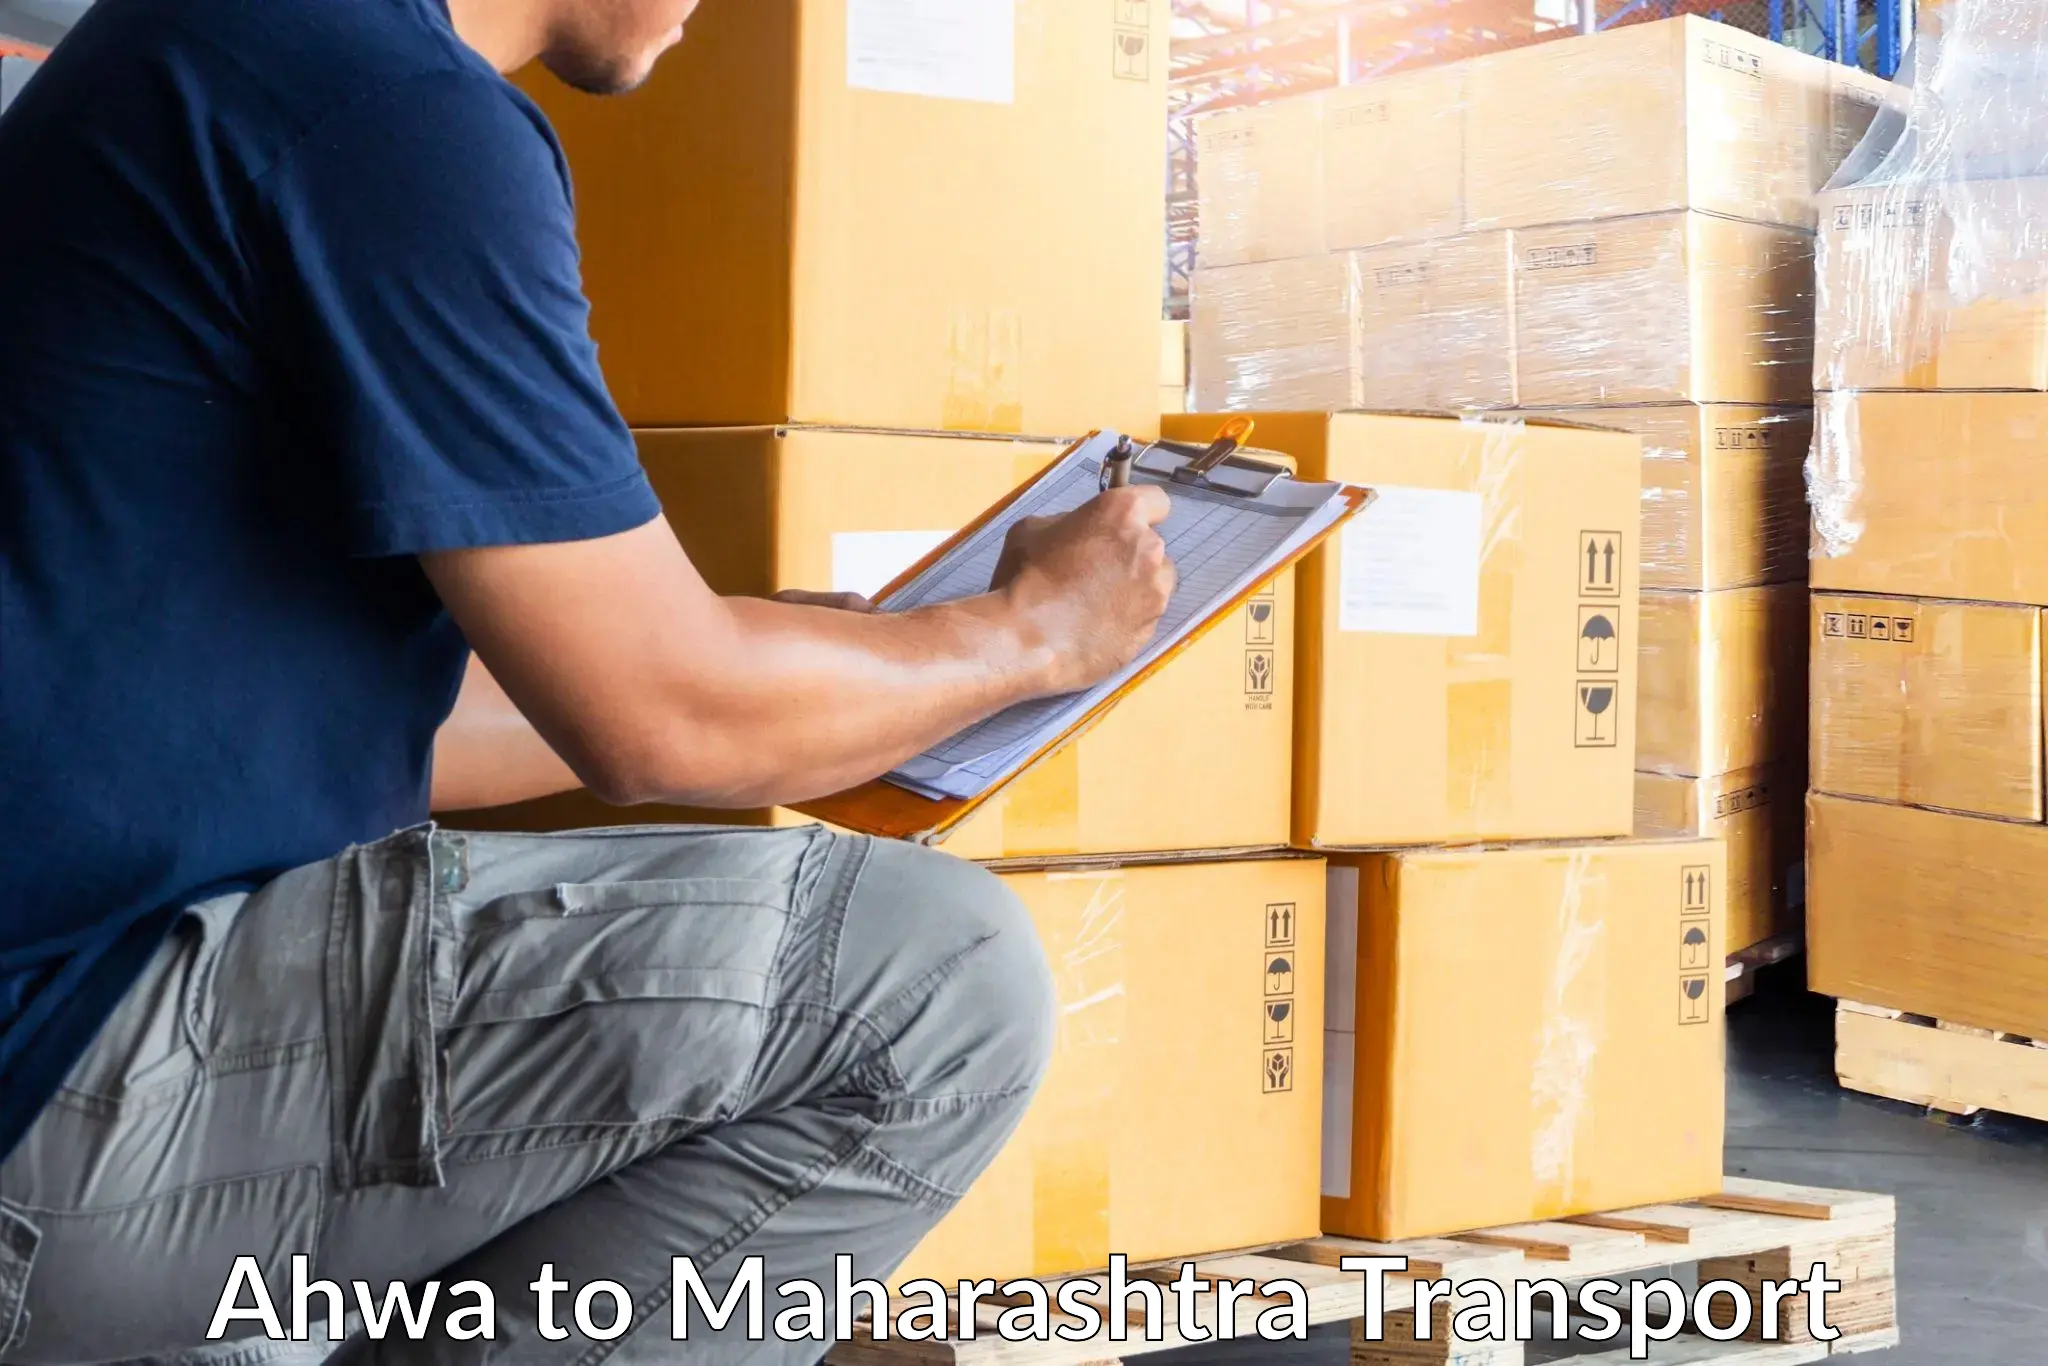 Parcel transport services Ahwa to IIT Mumbai